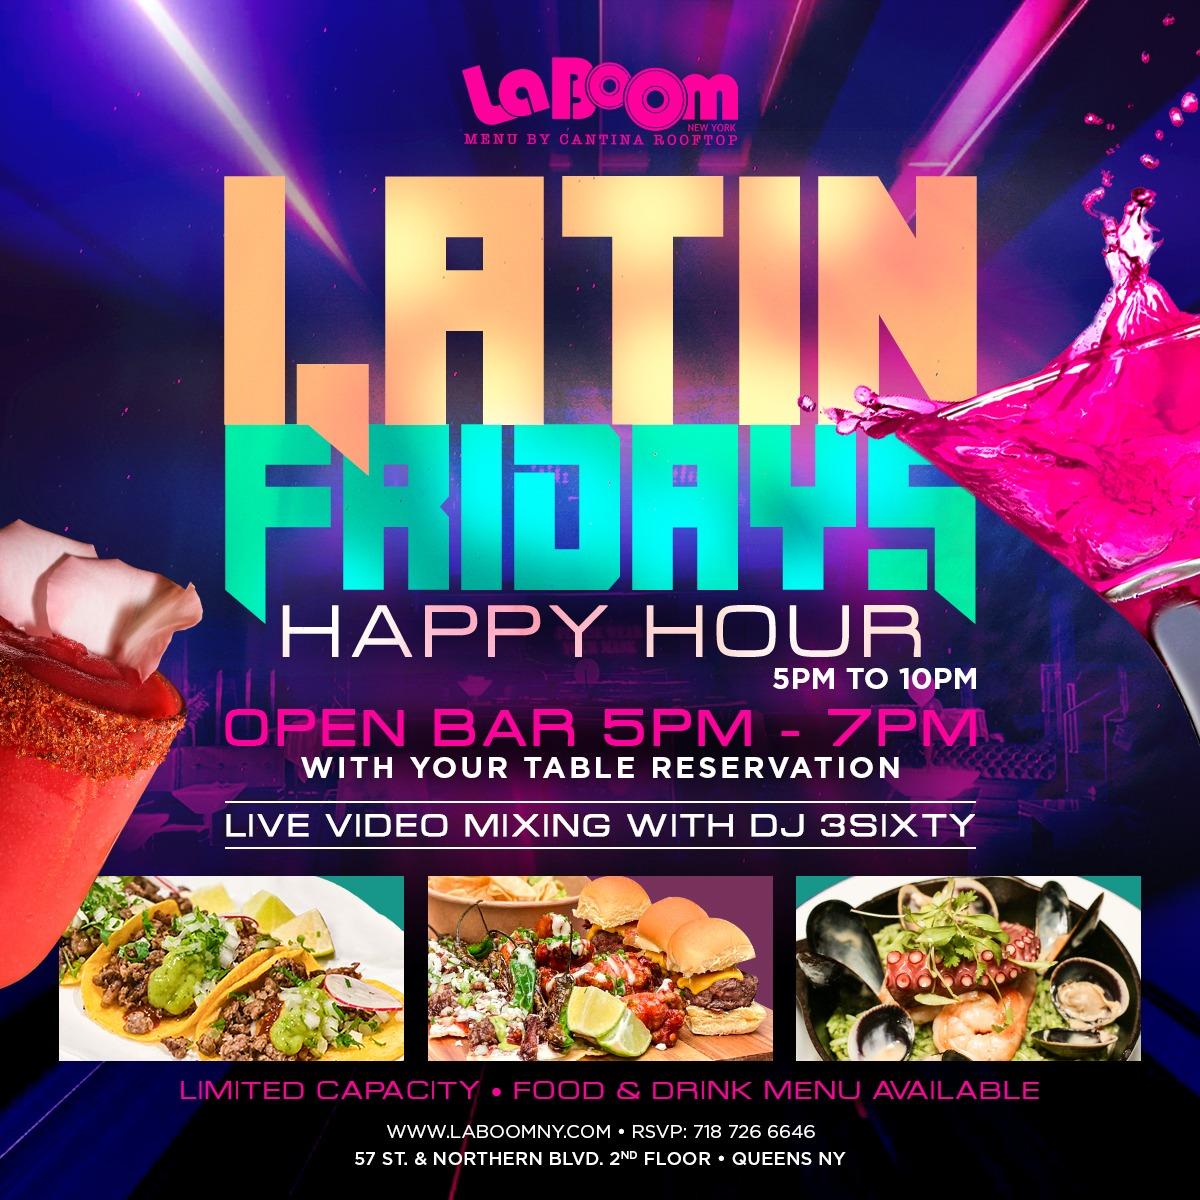 #1 LATIN FRIDAYS AFTER WORK | HAPPY HOUR 5-6PM